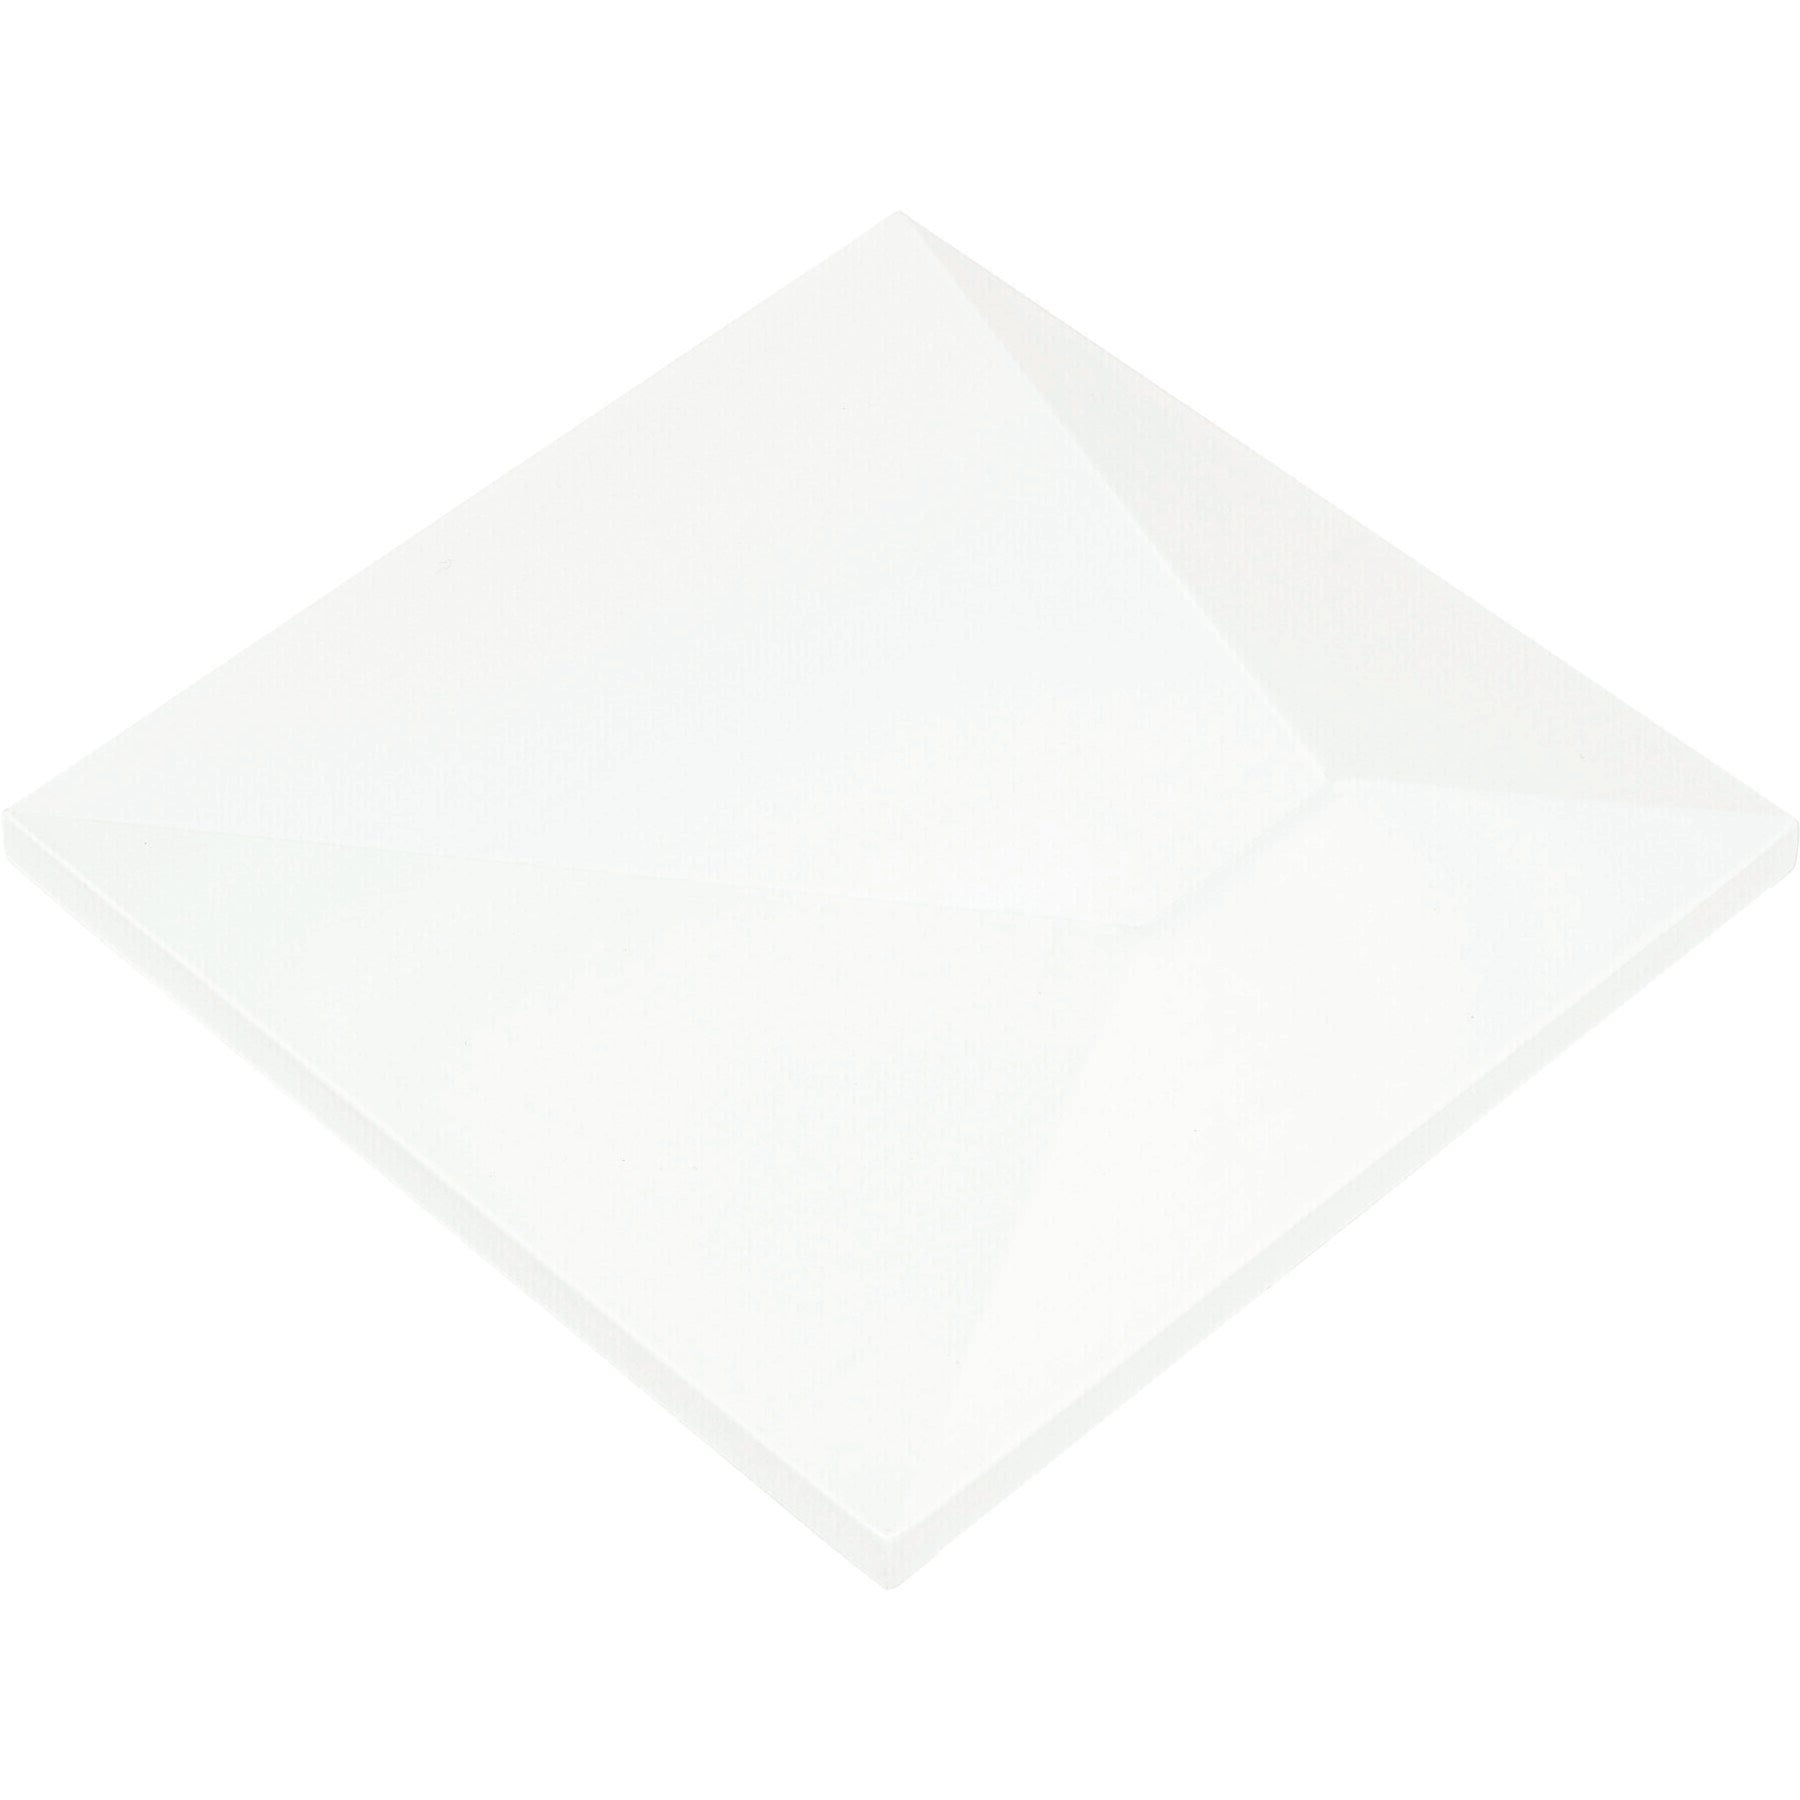 Daltile - STARE™ Collection - Electric 6 in. x 6 in. Tile - Apex Joule White